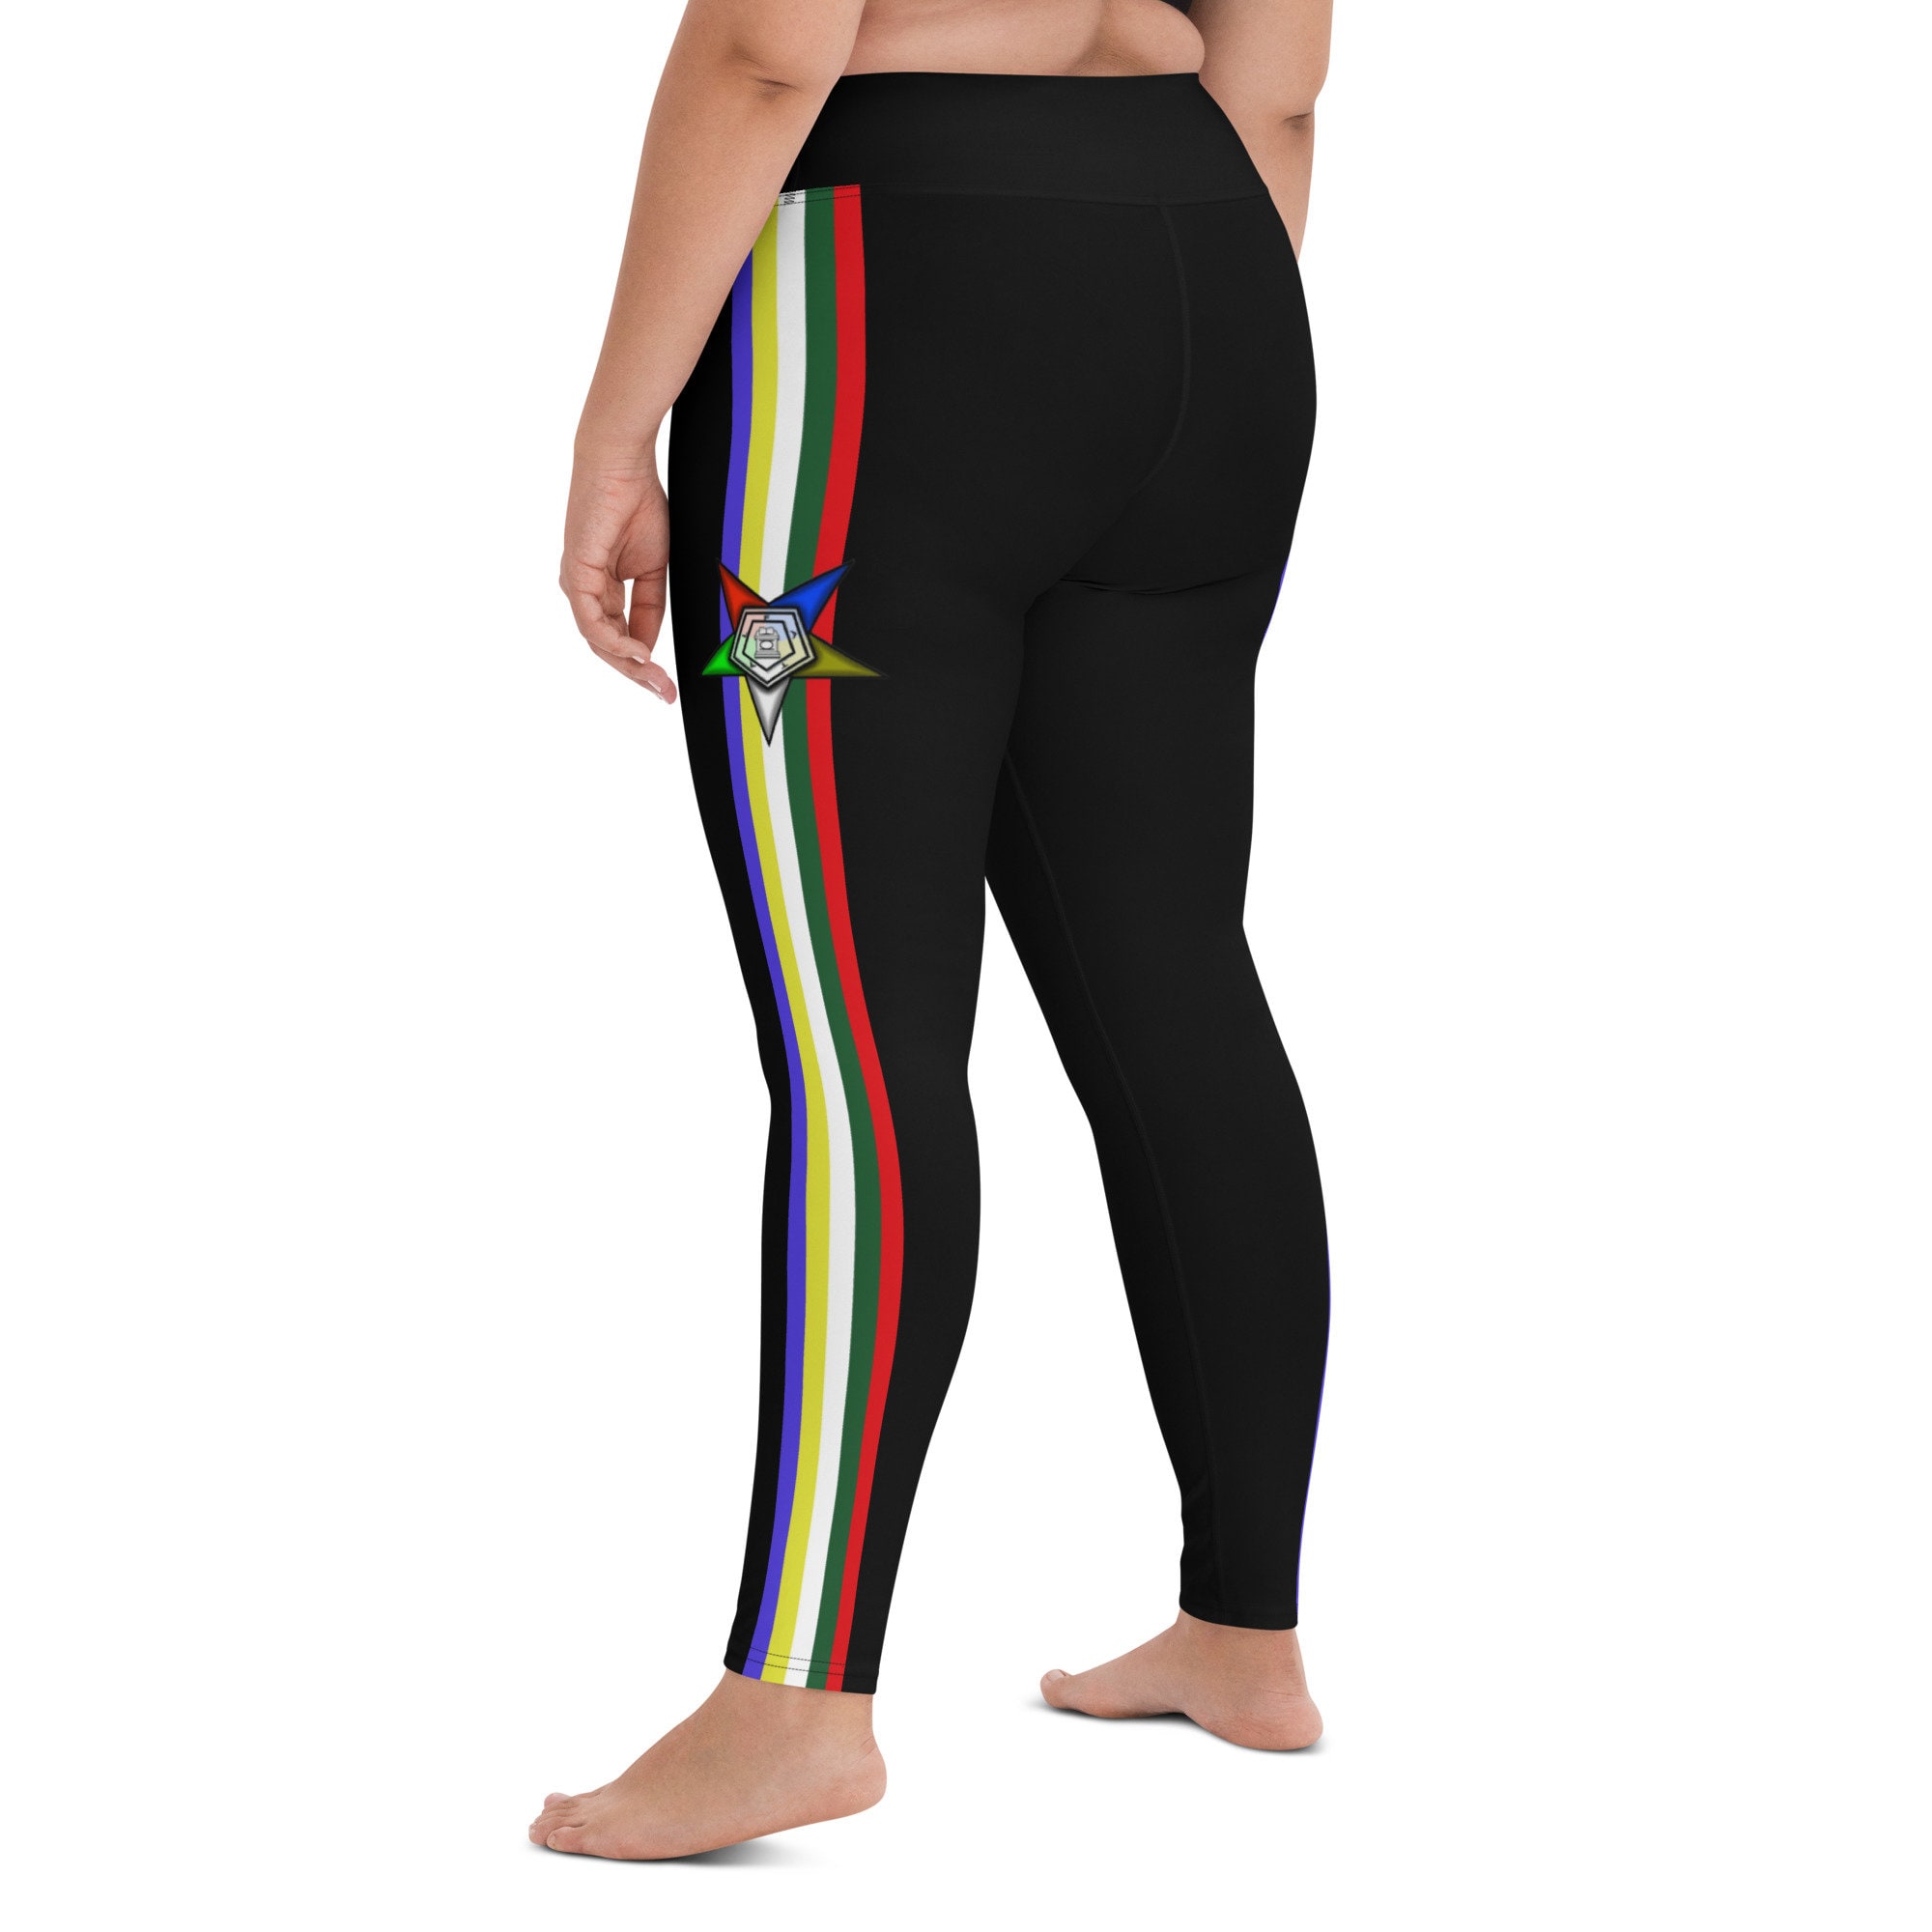 Black Stripe Leggings for Women With 5 High Waist, Slimming, Yoga Pants,  Buttery Soft, One Size Black Leggings, Plus Size Black Leggings 